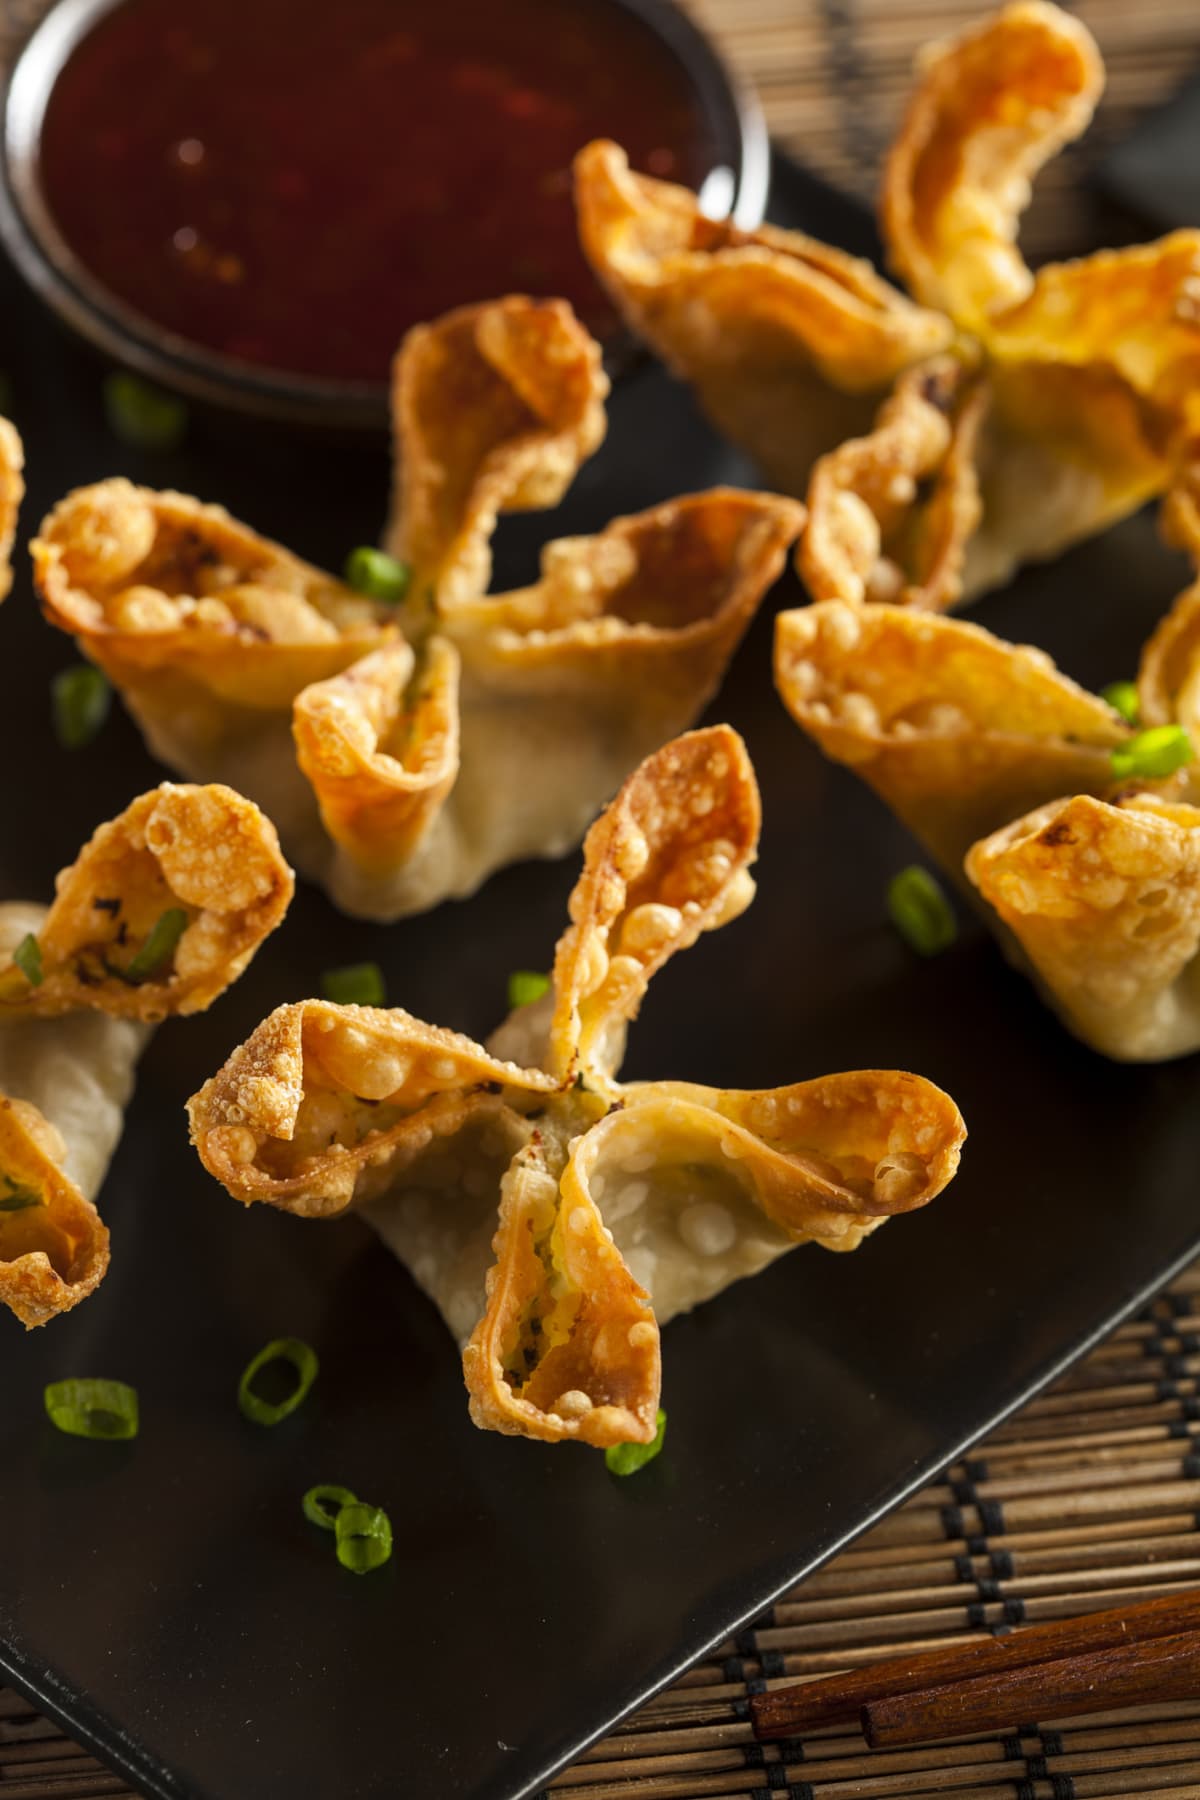 Crab rangoons with sliced onions and sweet and sour sauce